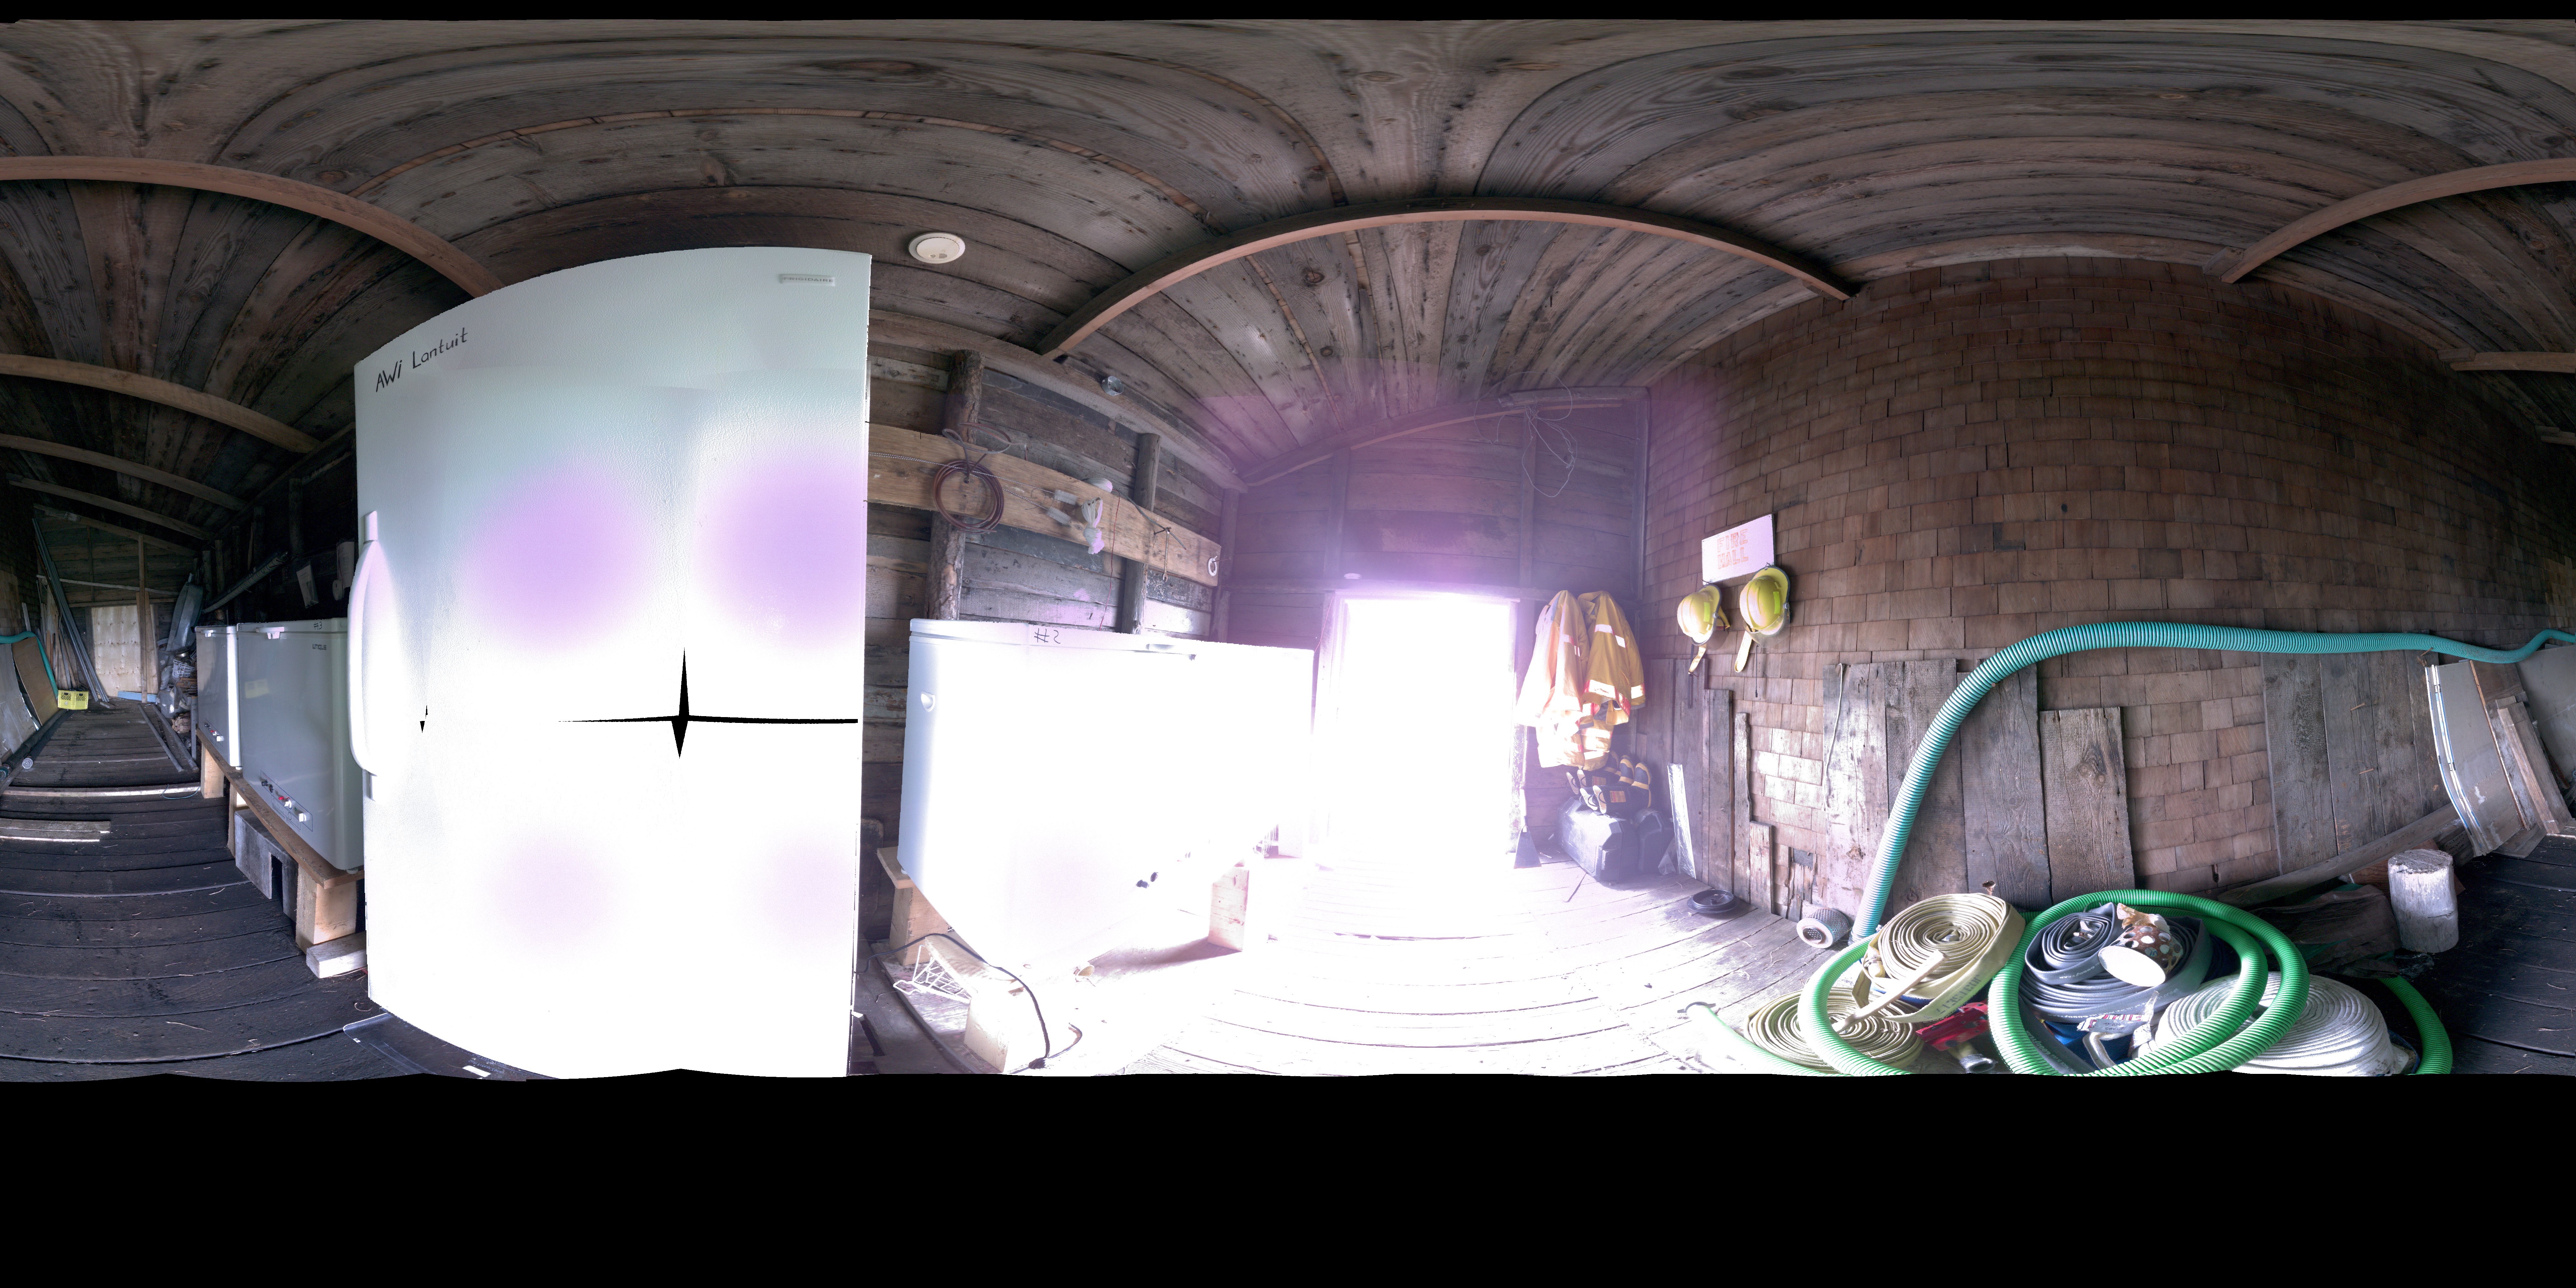 Panoramic view of the Pacific Steam Whaling Co. Bonehouse interior from the Leica BKL 360, scanning location 6